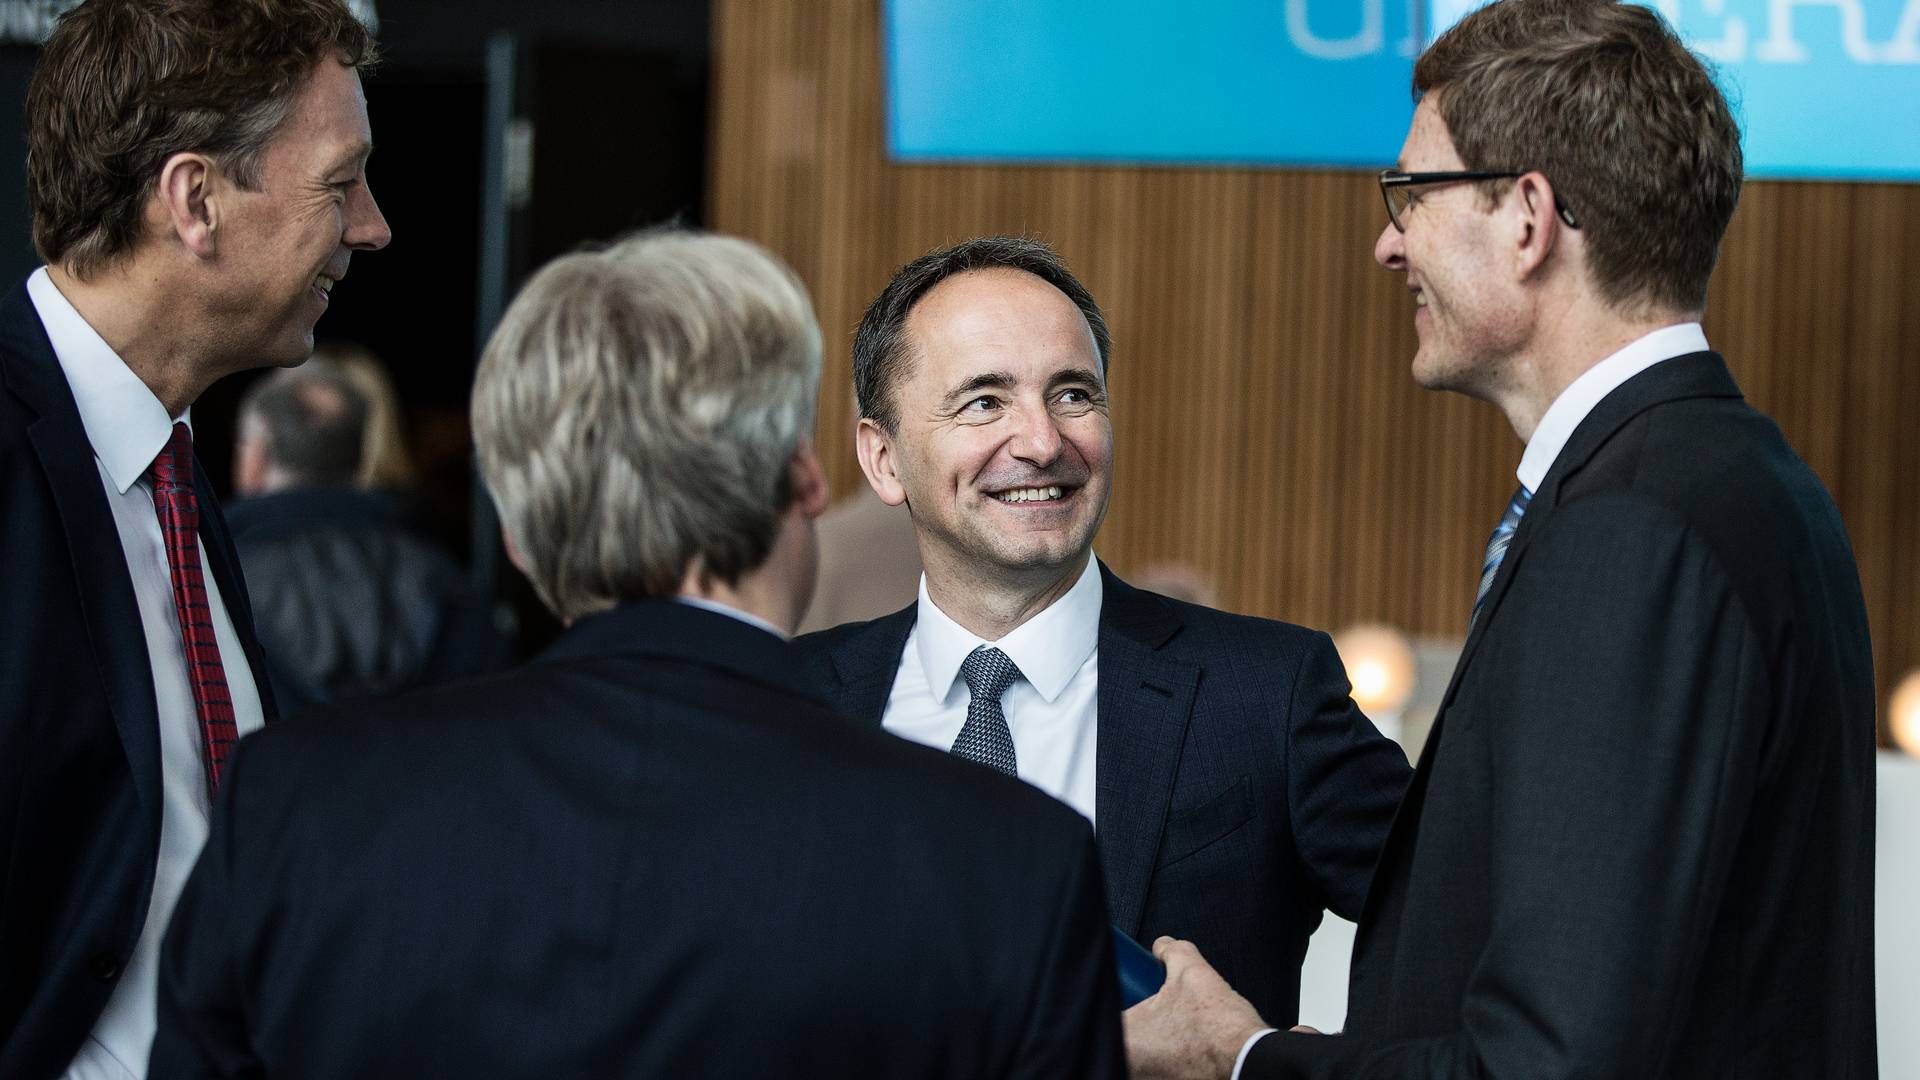 Jim Hagemann Snabe, former chairman of the board of A. P. Moller-Maersk. | Photo: Niels Hougaard